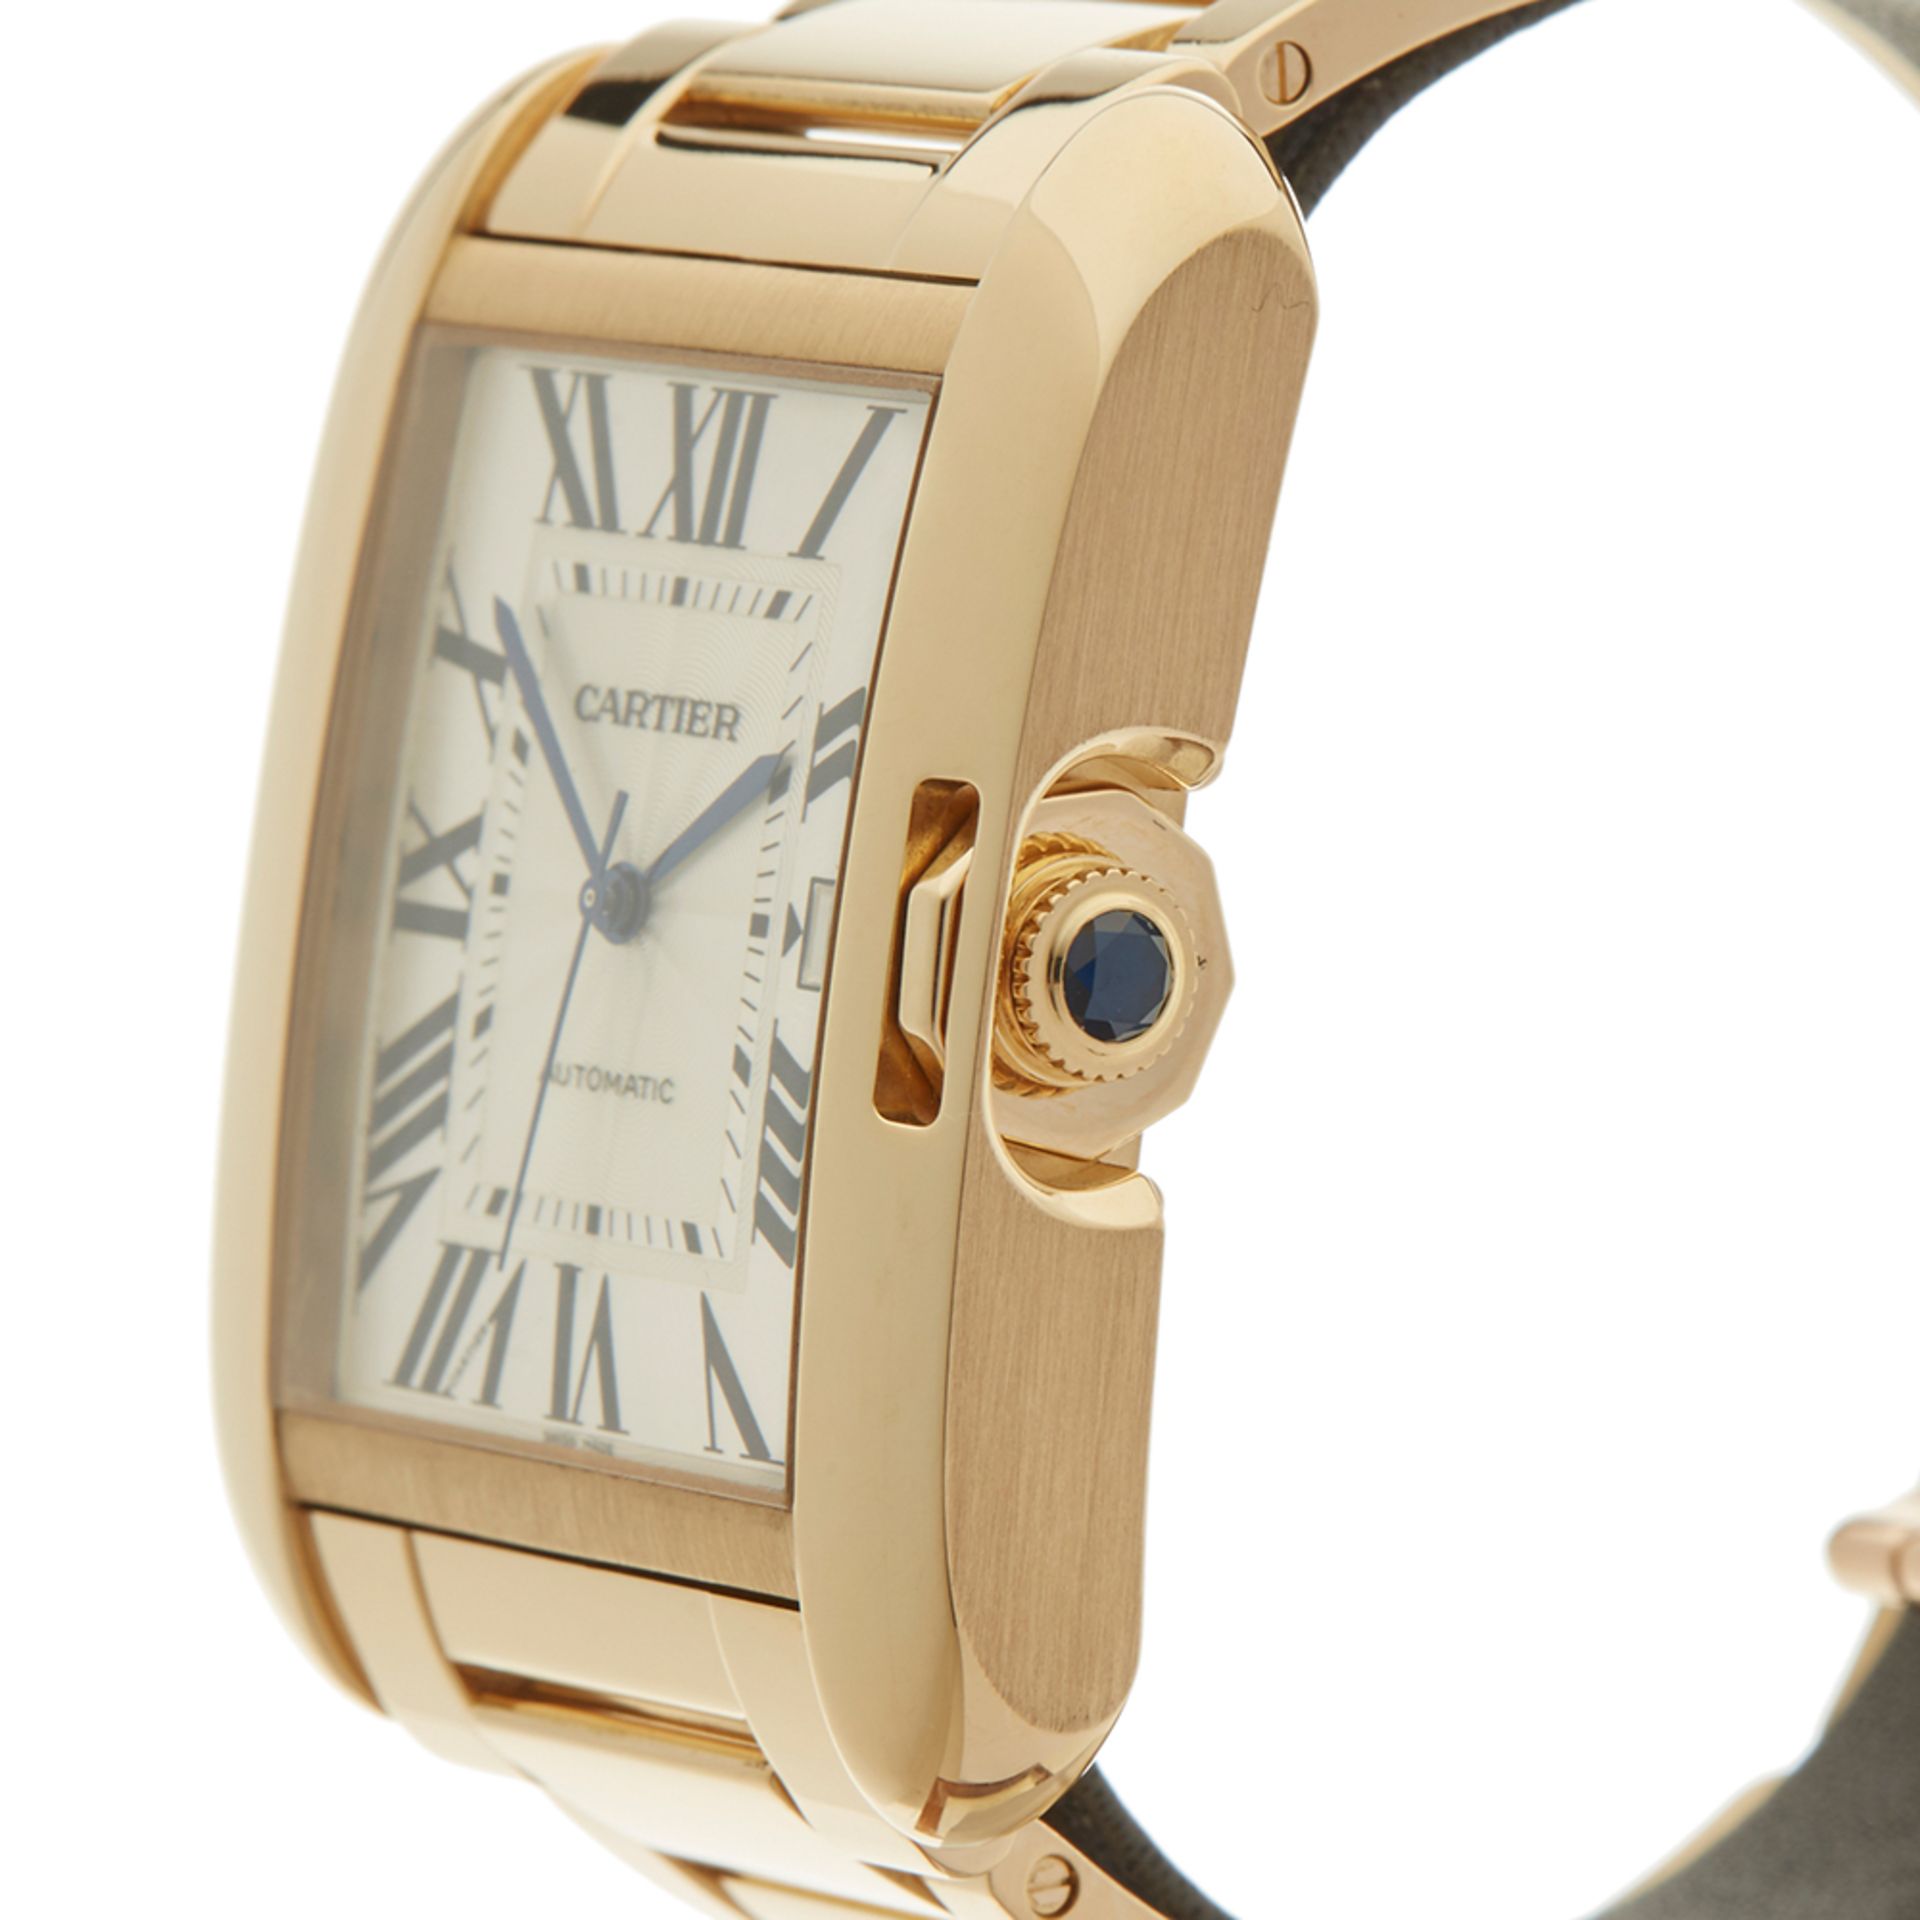 Cartier Tank Anglaise 37mm 18k Yellow Gold - 3505 or W5310018 - Image 4 of 8